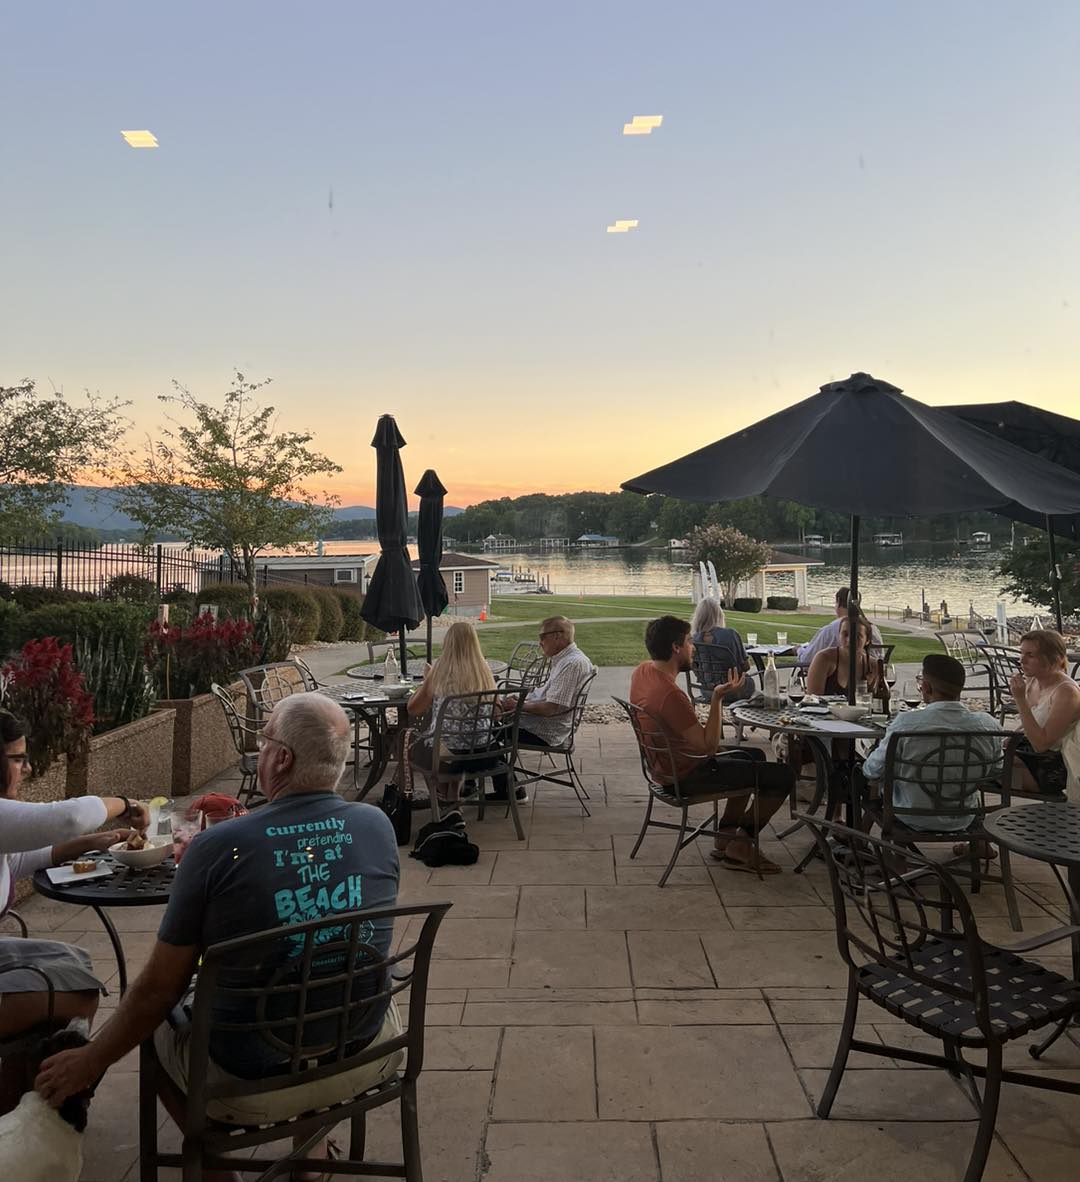 The Landing Restaurant has a patio overlooking the lake, perfect for having dinner while watching the sunset!